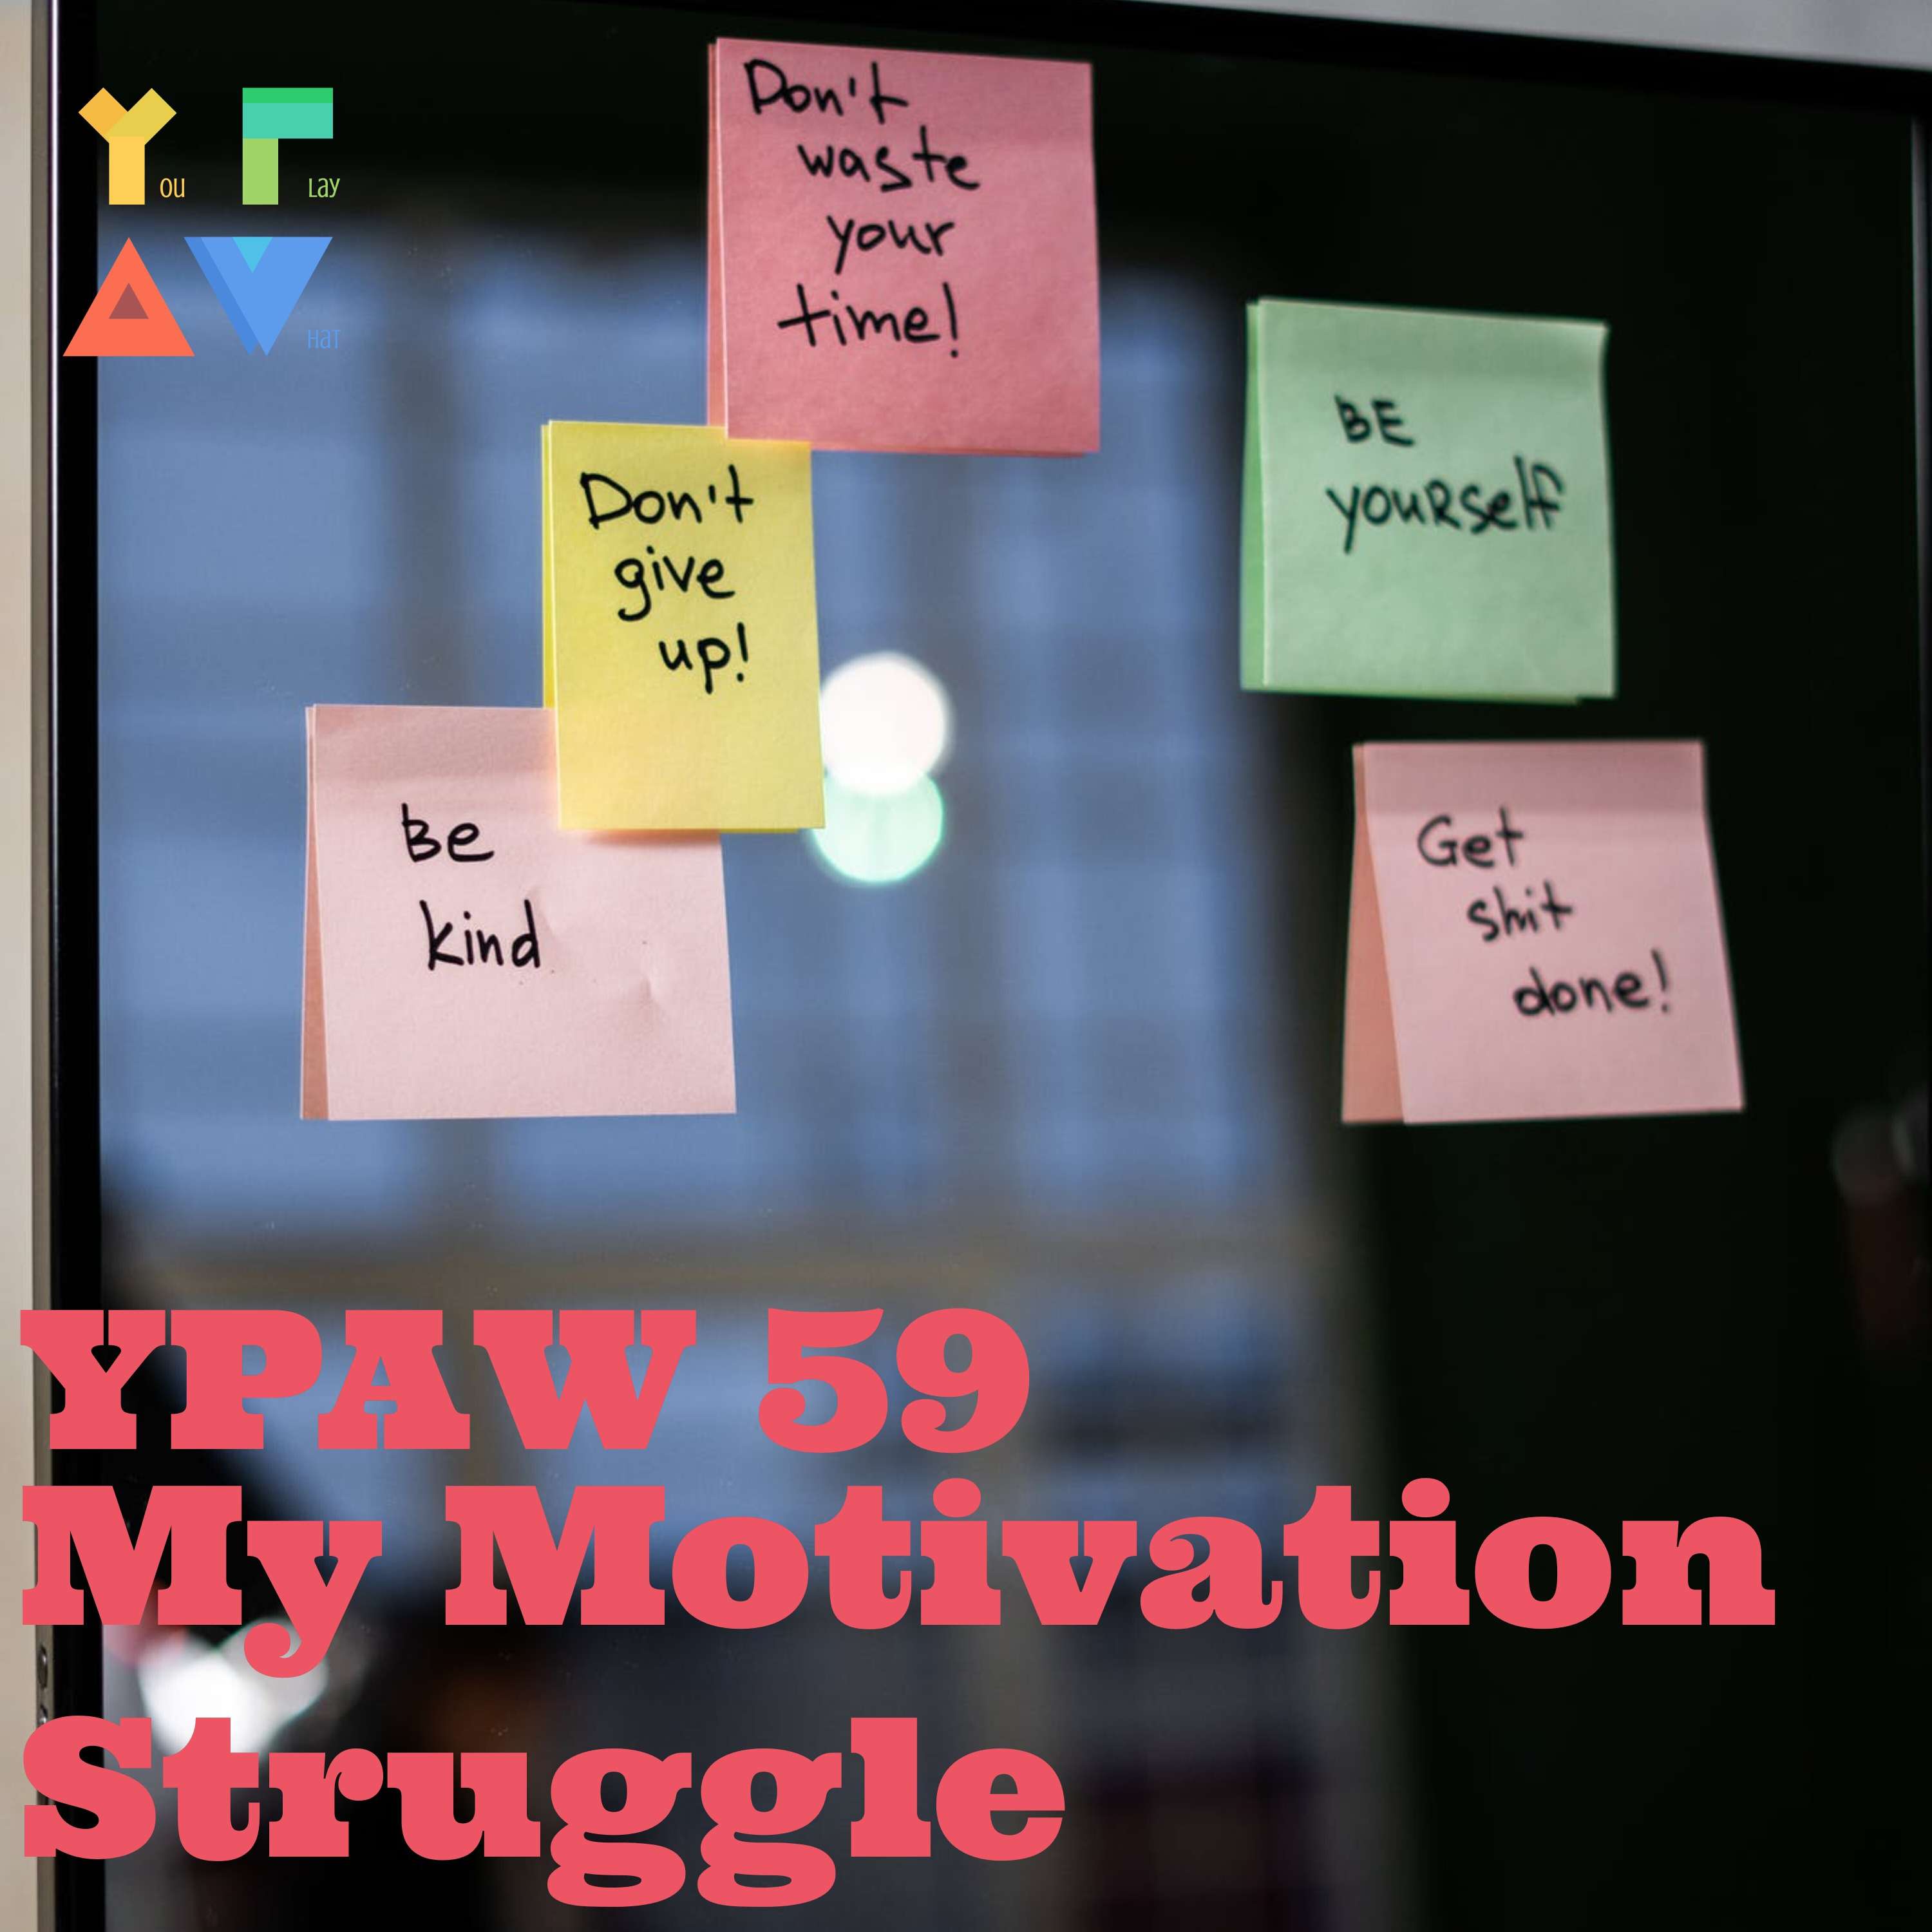 YPAW 59: My Motivation Struggles - Lack of Motivation, Detaching my views from my Identity, Defining my personal values, Rethinking how to live a value driven life